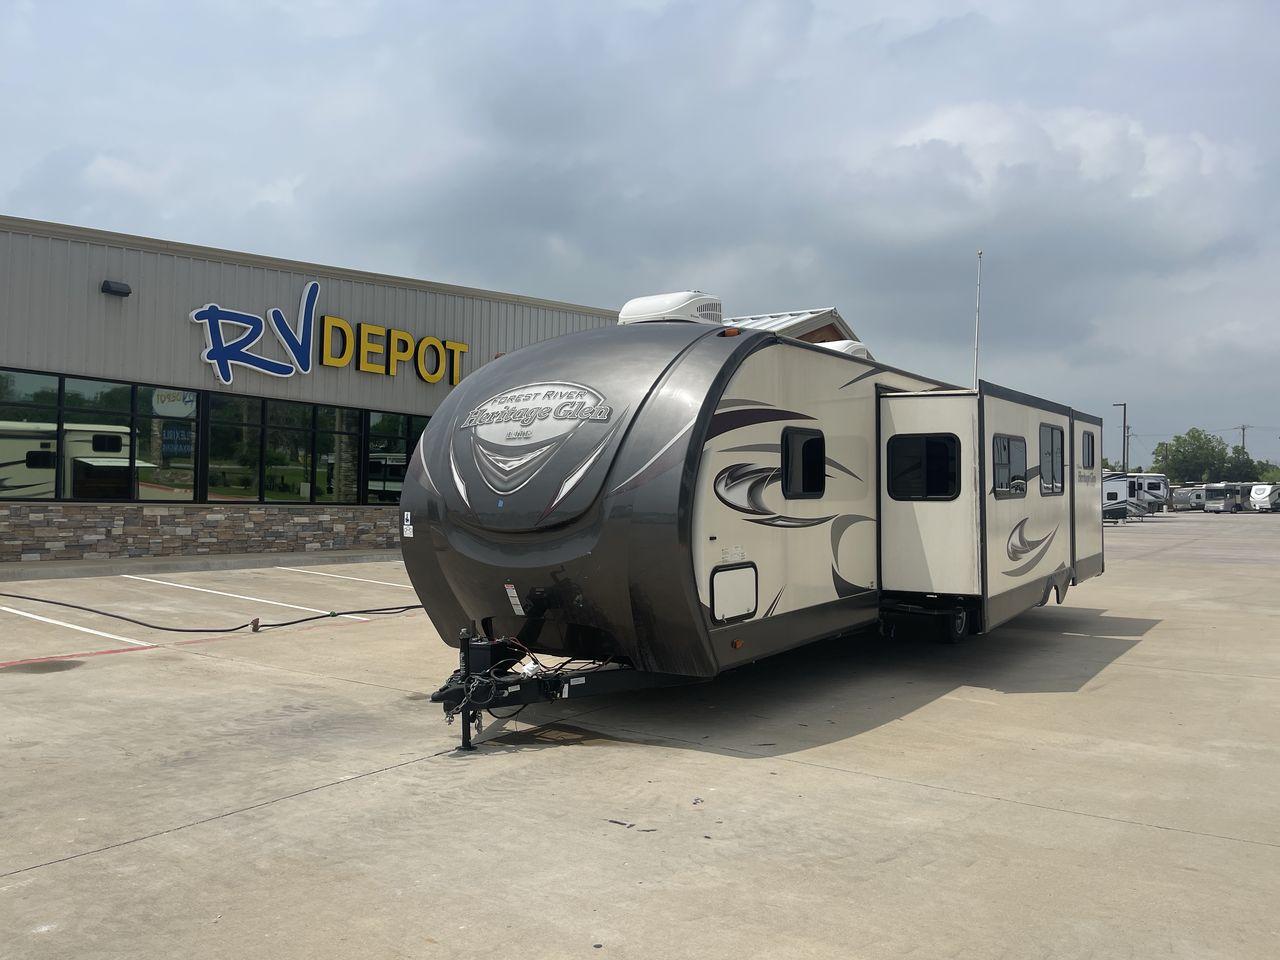 2017 TAN WILDWOOD HERITAGE GLEN 300BH (4X4TWBF29HU) , Length: 37.42 ft. | Dry Weight: 8,439 lbs. | Slides: 3 transmission, located at 4319 N Main Street, Cleburne, TX, 76033, (817) 221-0660, 32.435829, -97.384178 - The 2017 Wildwood Heritage Glen 300BH has roomy and comfortable rooms for your outdoor activities. This travel trailer offers ample space for the entire family, measuring 37.42 feet in length and weighing 8,439 pounds when dry. This trailer is designed with three slides, providing ample interior spa - Photo #0